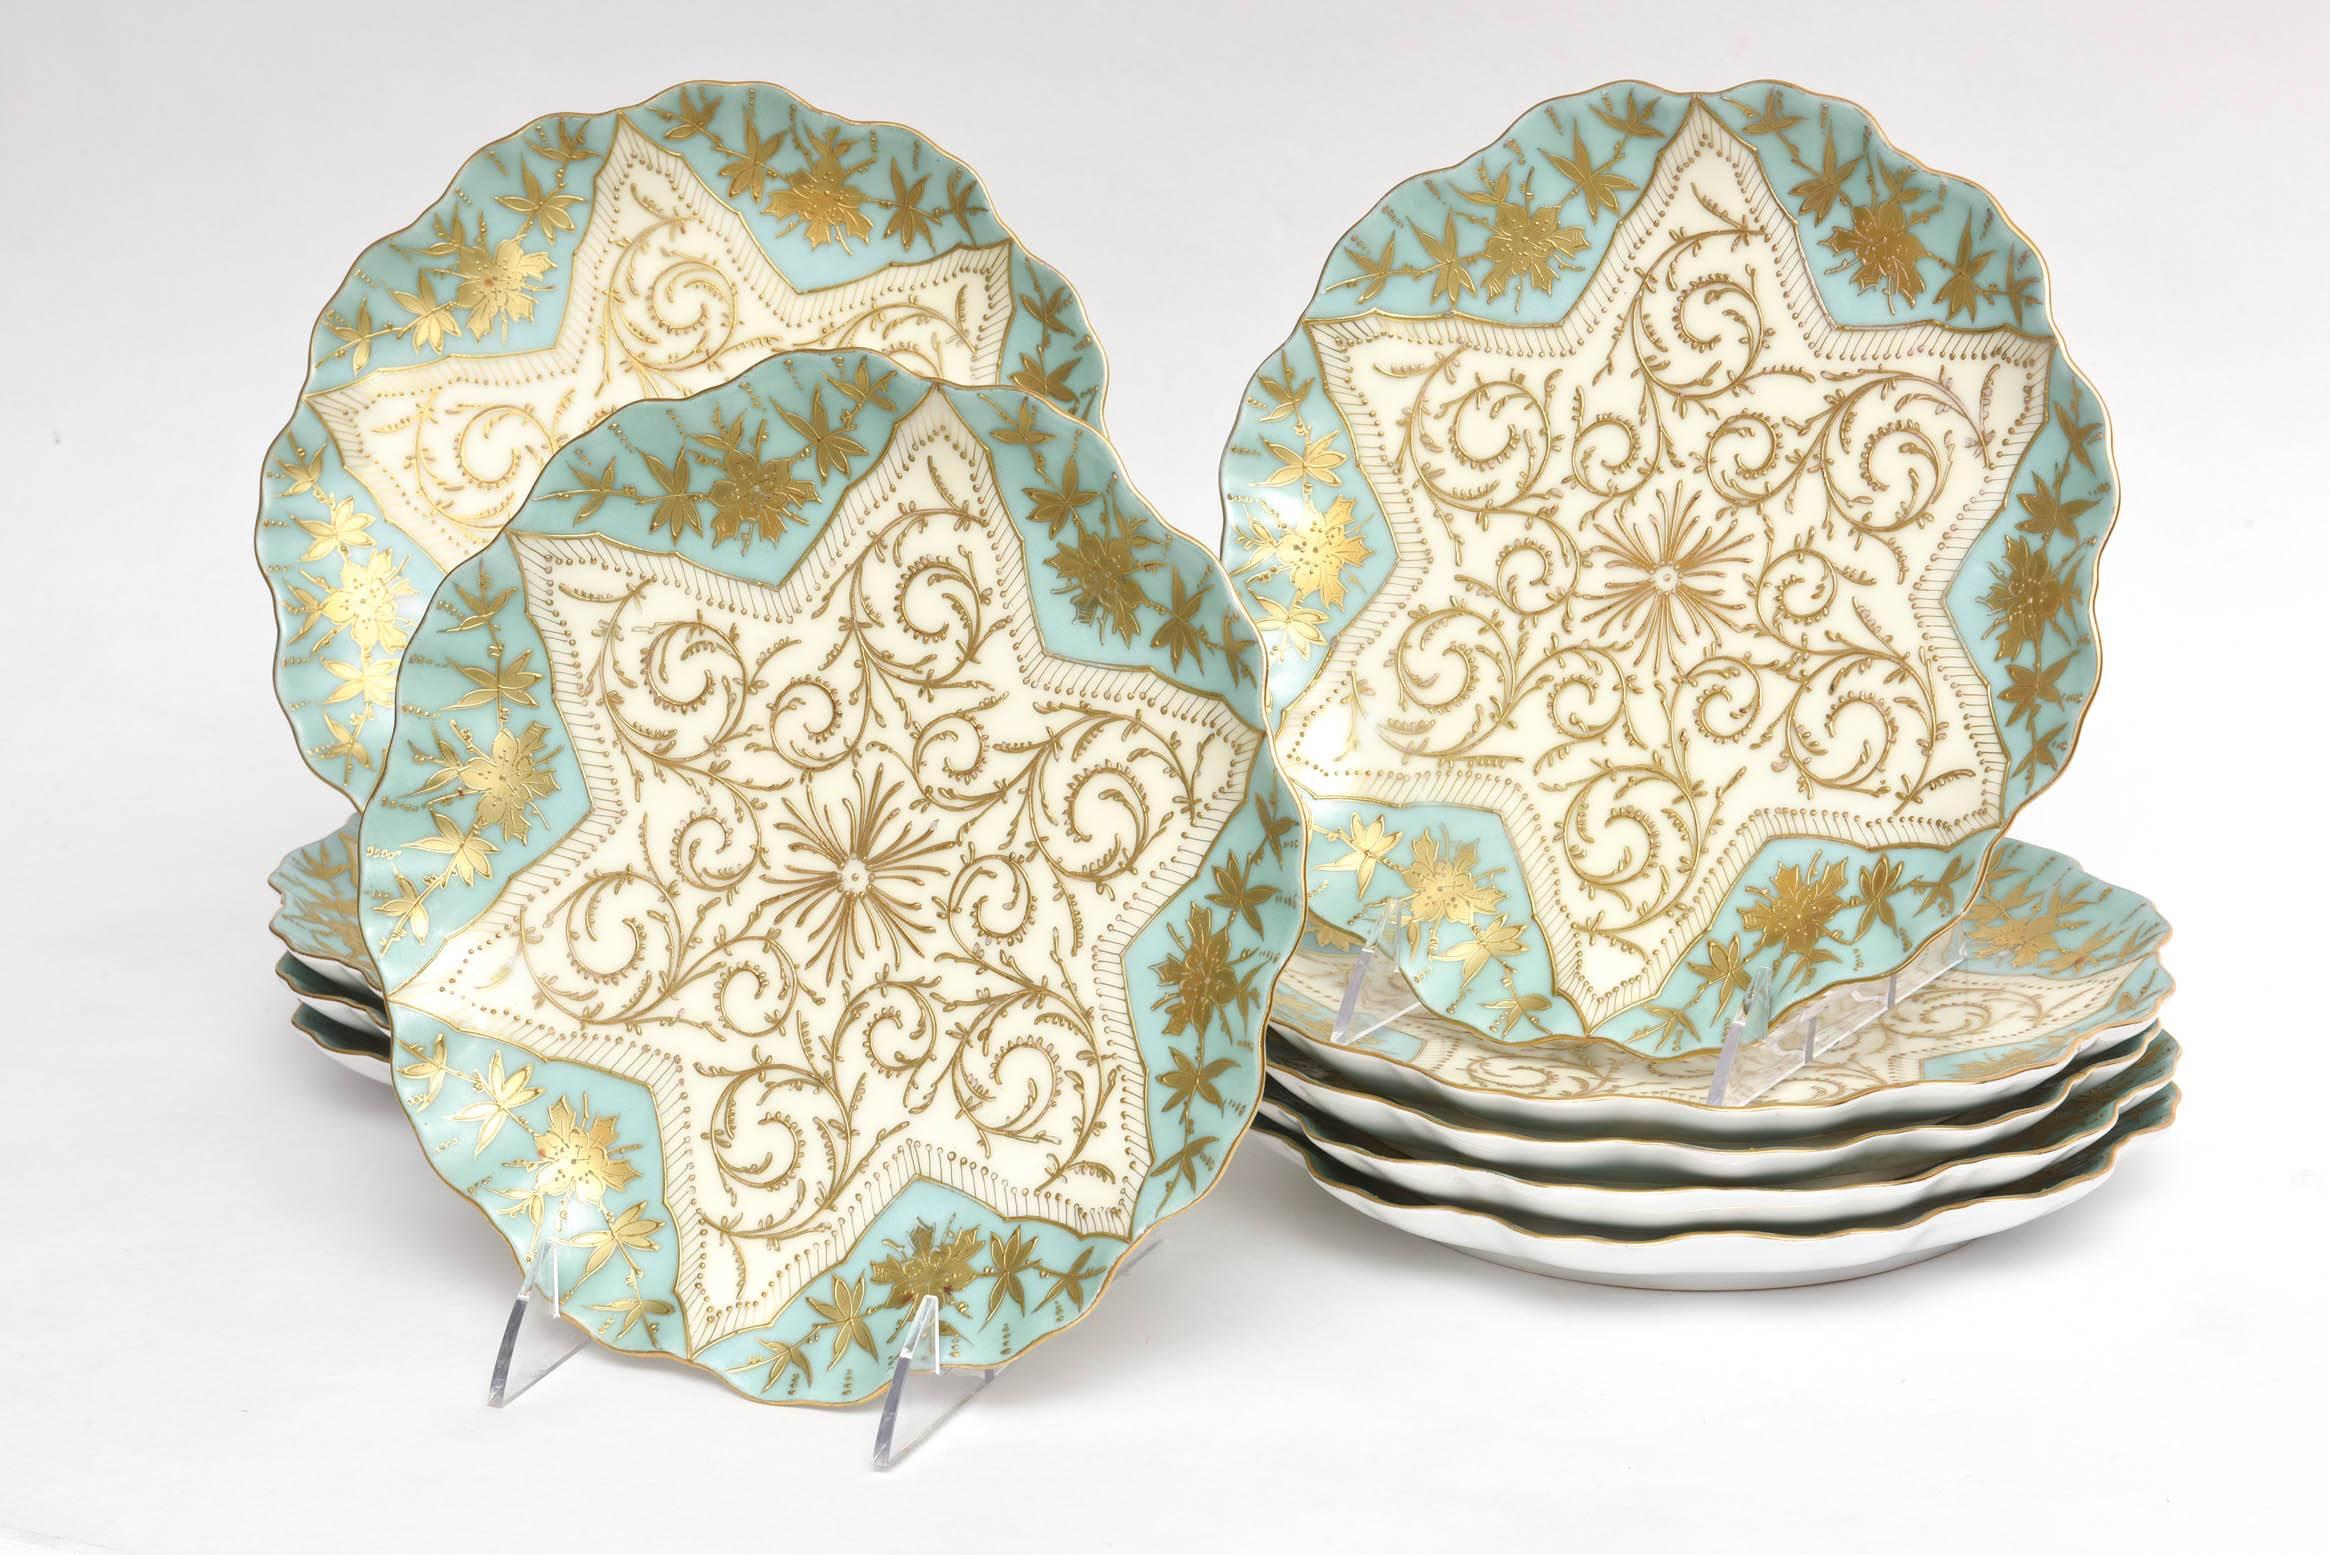 A beautiful shade of soft aqua or sea foam, these plates were custom ordered through the fine gilded age retailer of Ovington Brothers New York. All-over decorated with raised paste gilding and featuring a pretty shade of turquoise. Fine bone